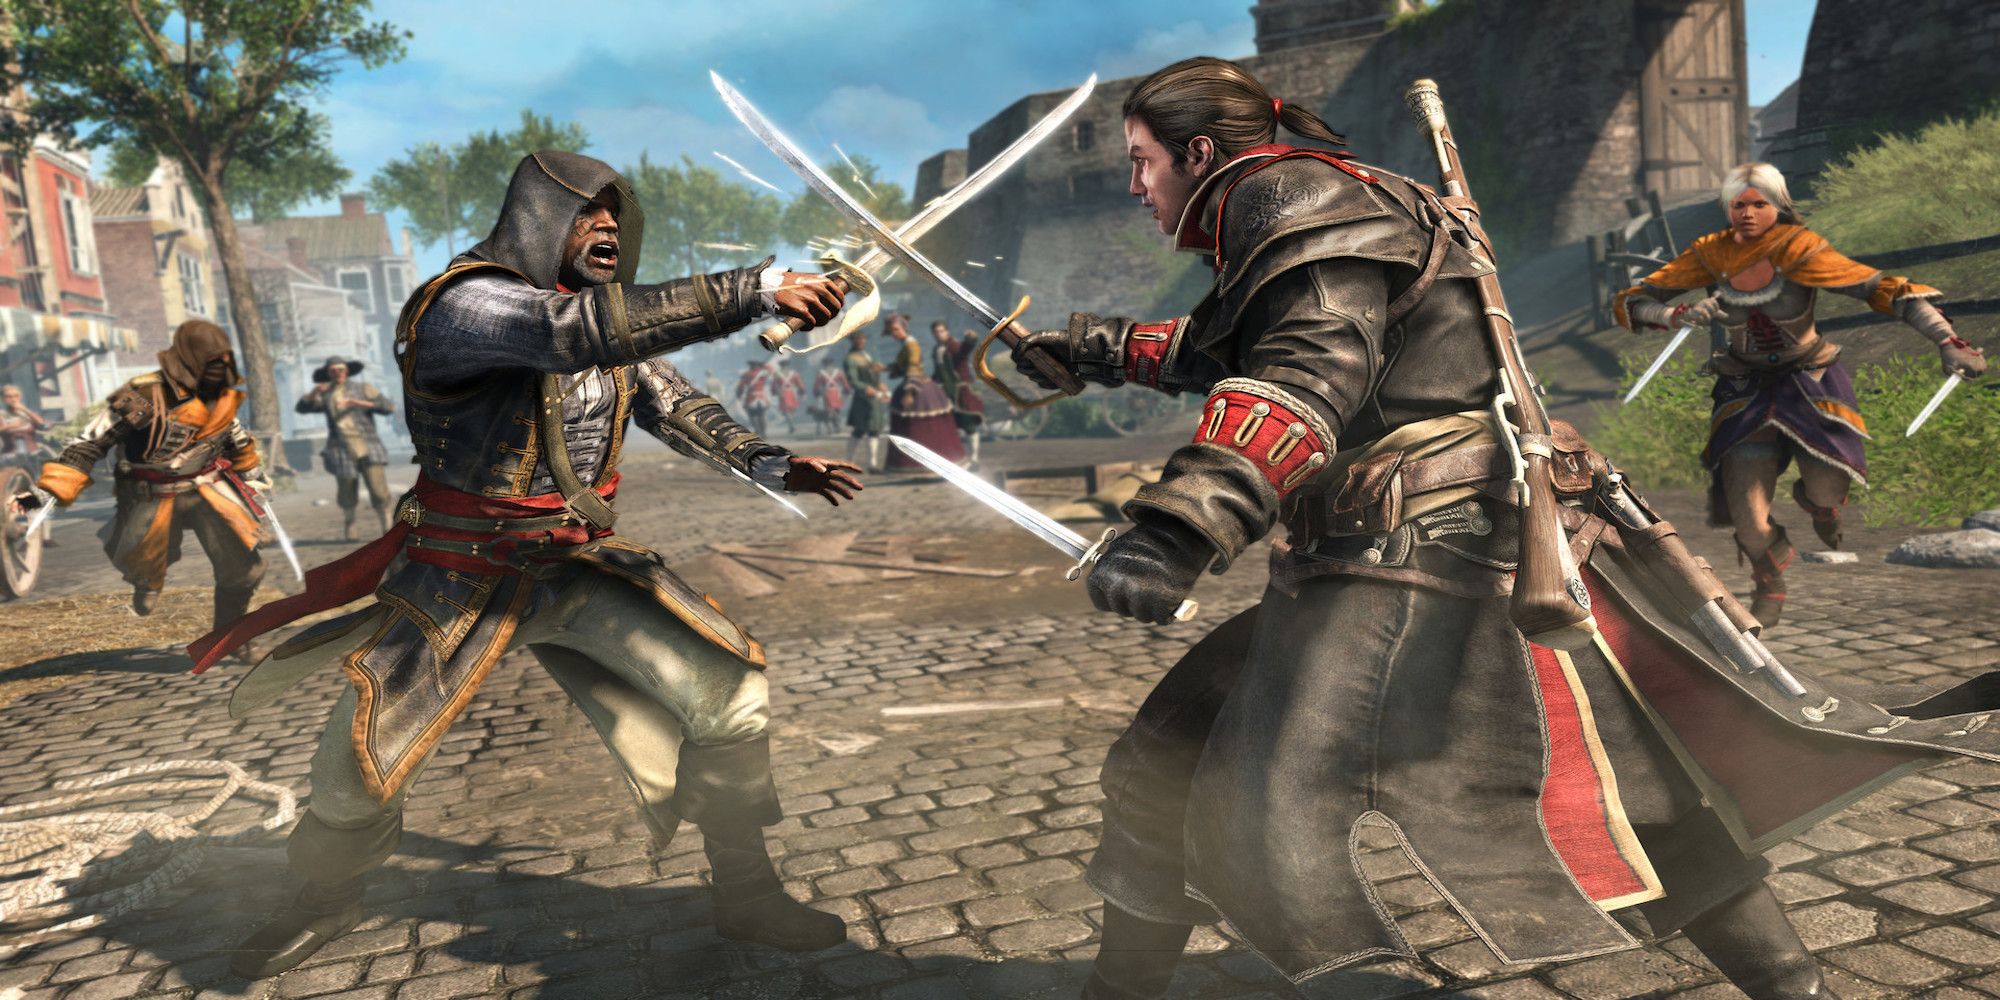 Fighting enemies in Assassin's Creed Rogue